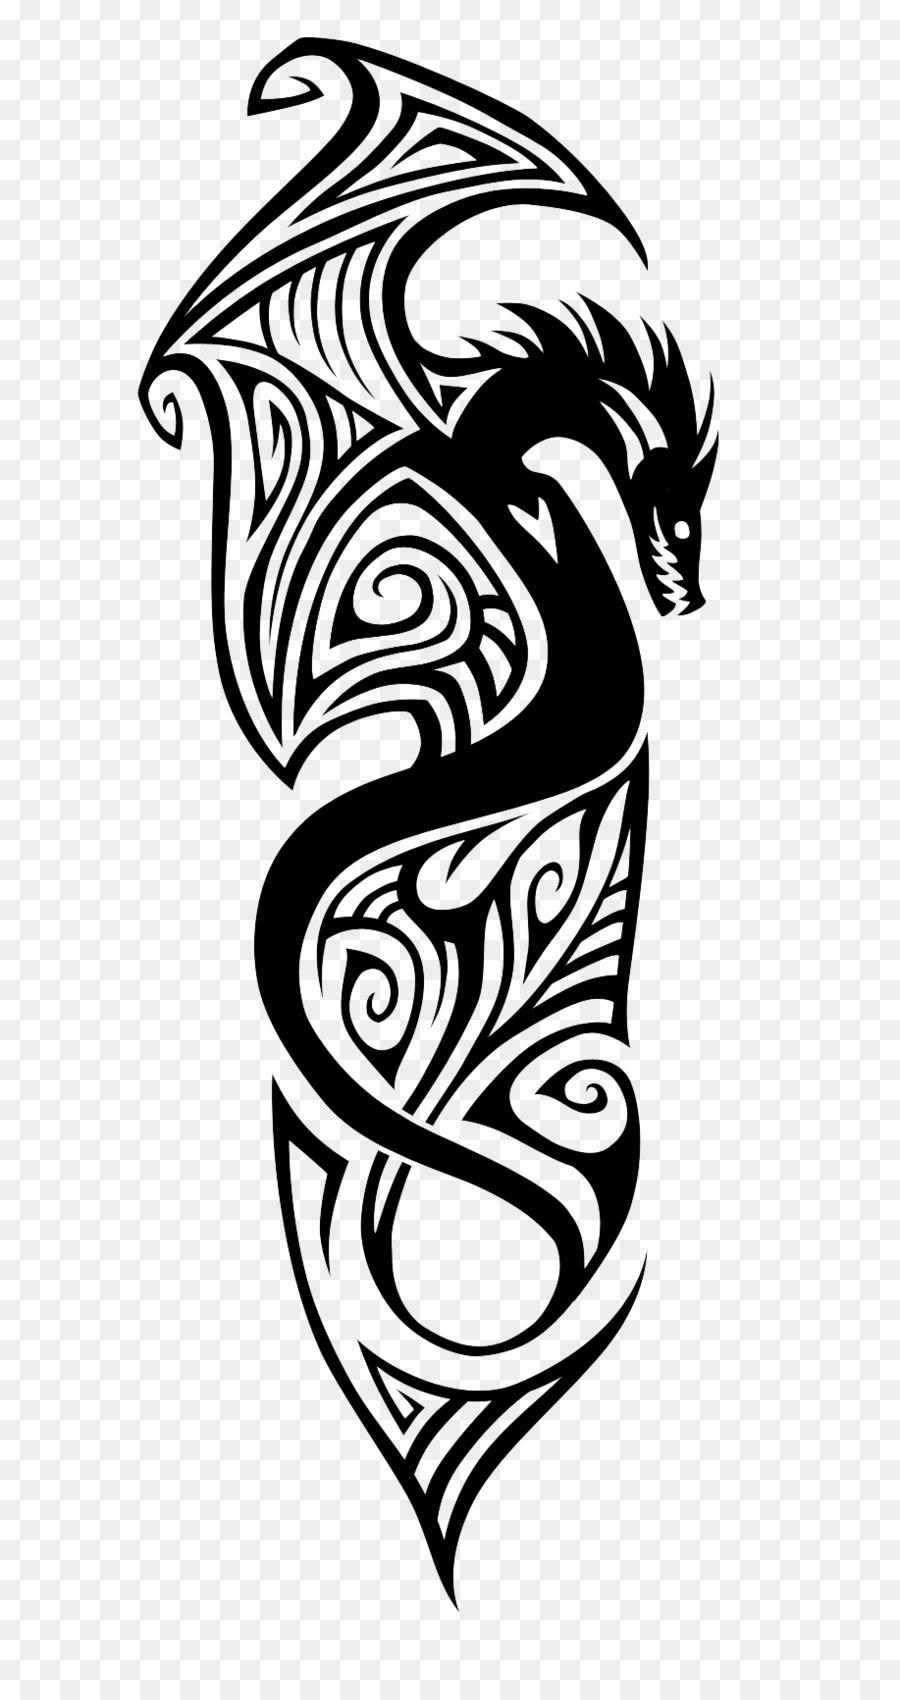 Sleeve tattoo Polynesia Finger moustache tattoo - Arm Tattoo PNG File png download - 917*1717 - Free Transparent Tattoo png Download.